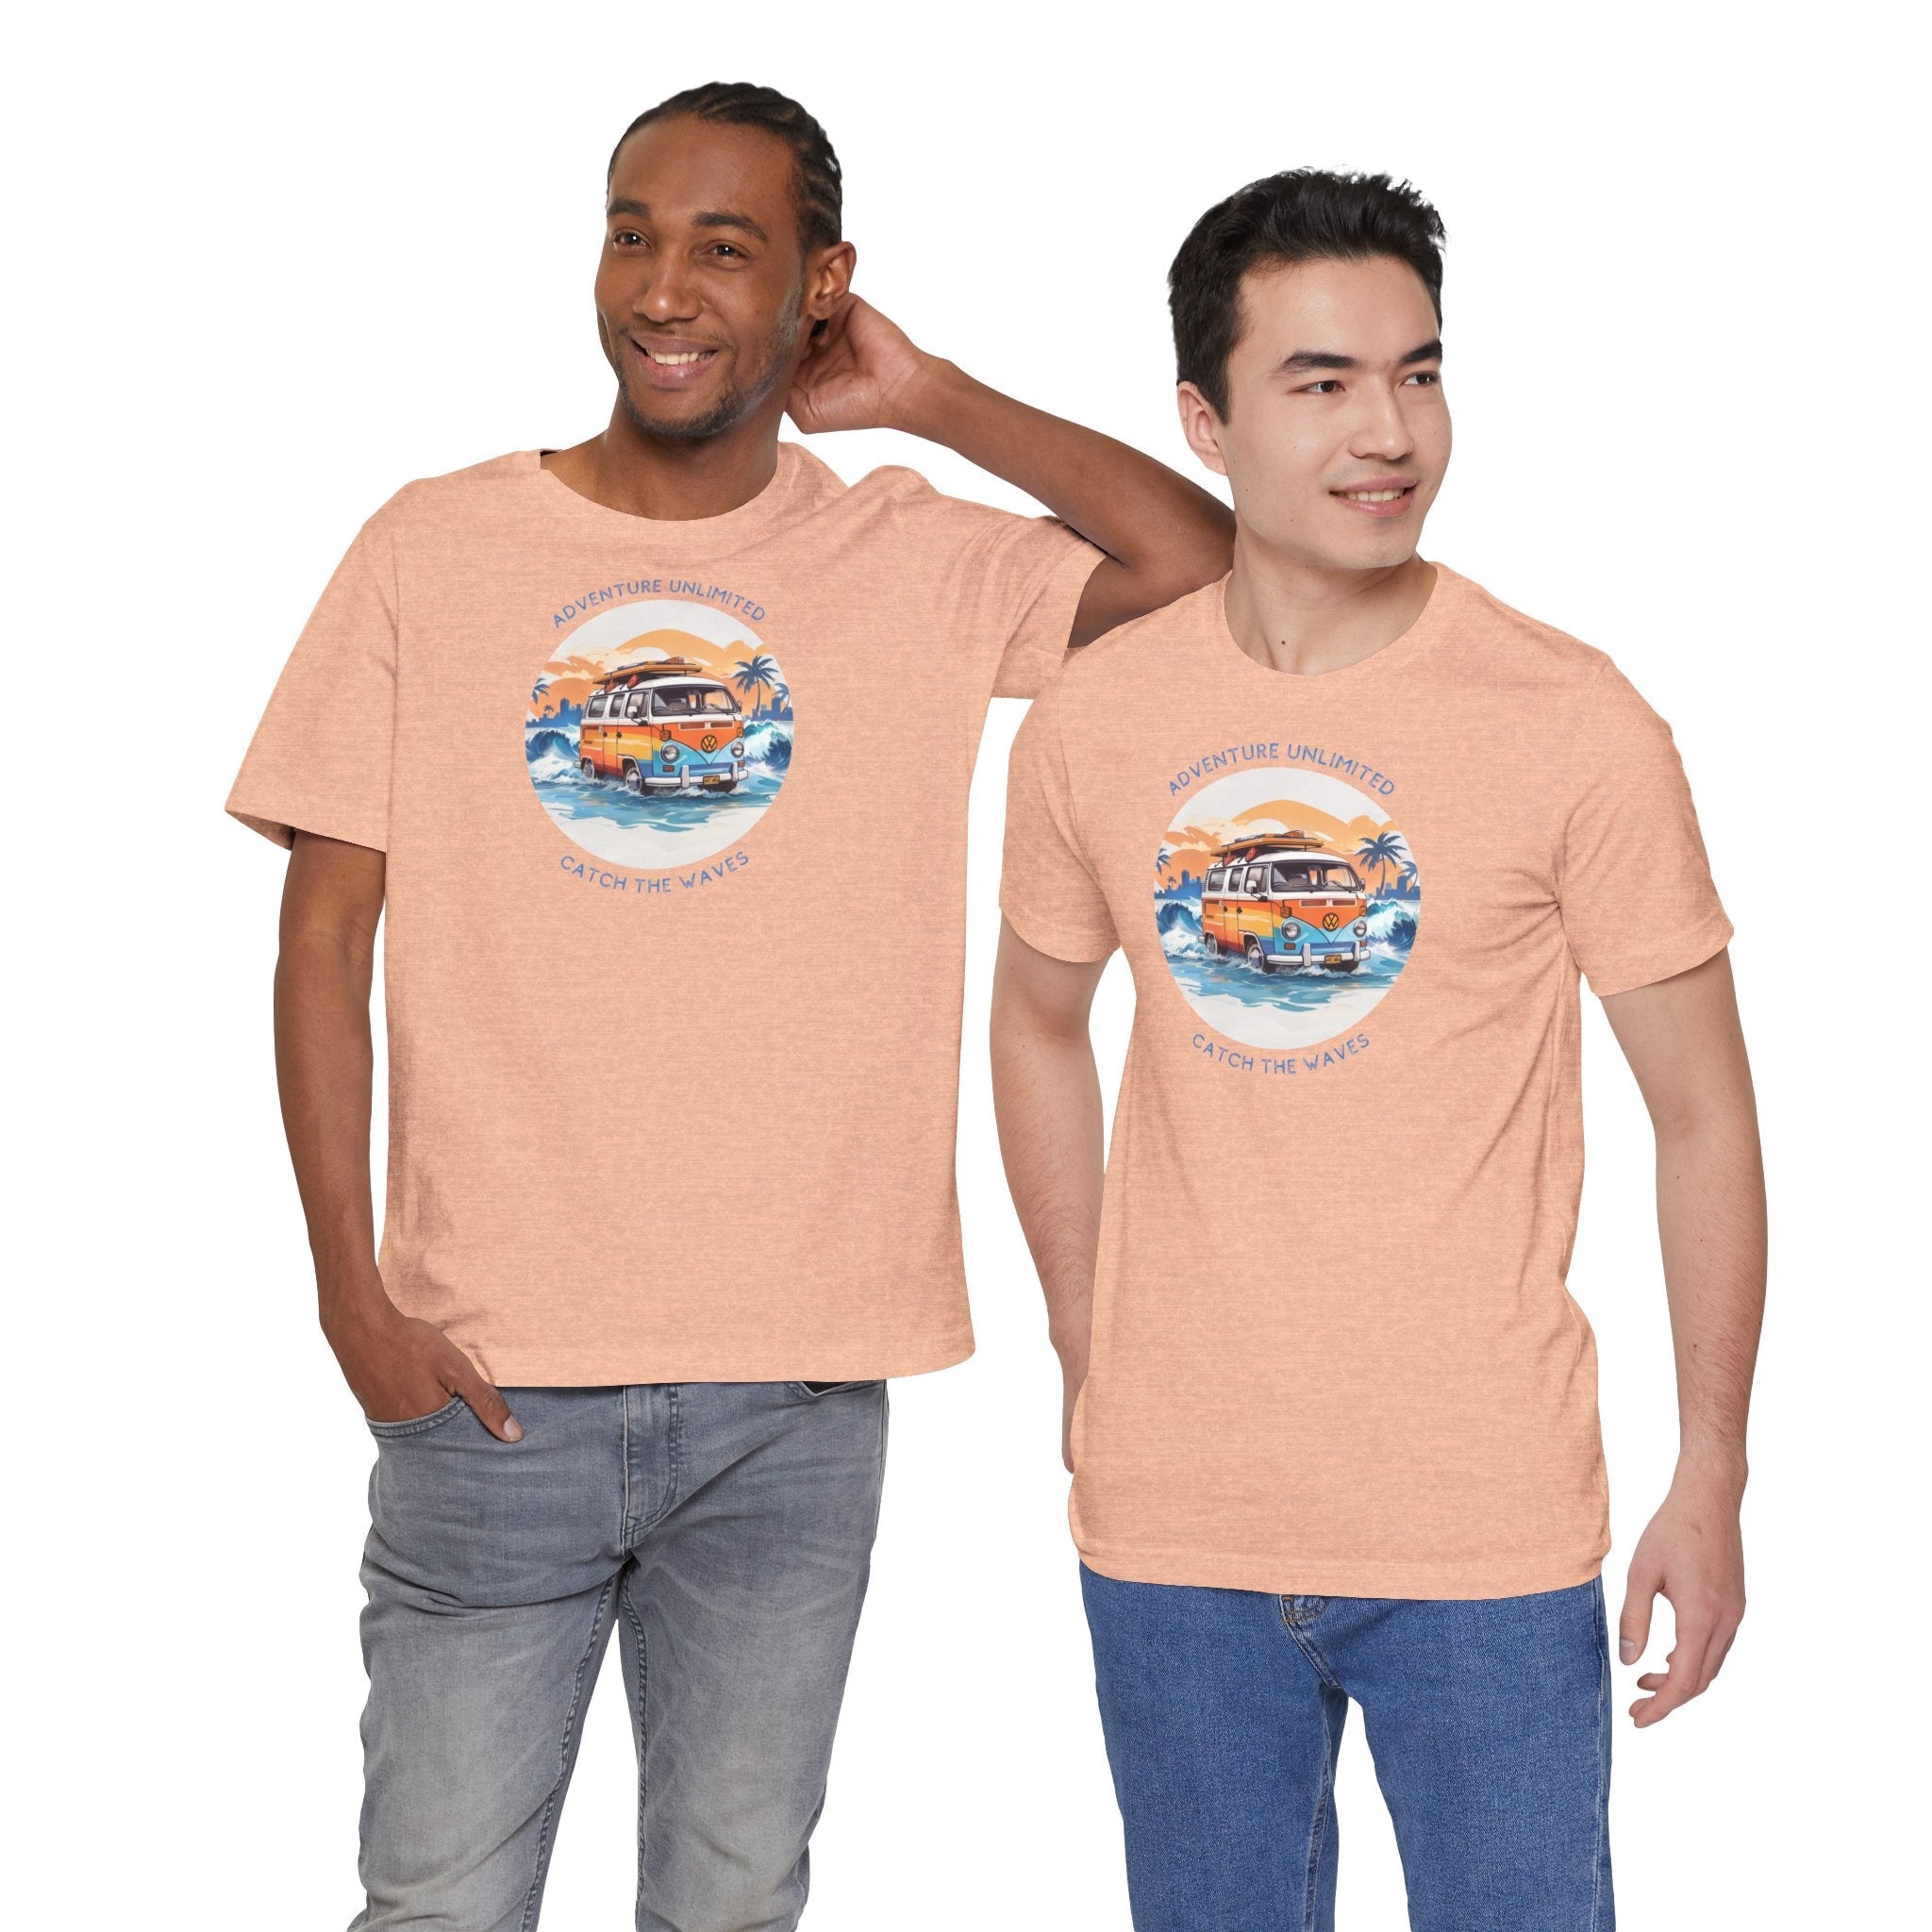 Two men wearing matching shirts - Adventure Unlimited Surfing T-Shirt printed on Bella & Canvas EU direct-to-garment item